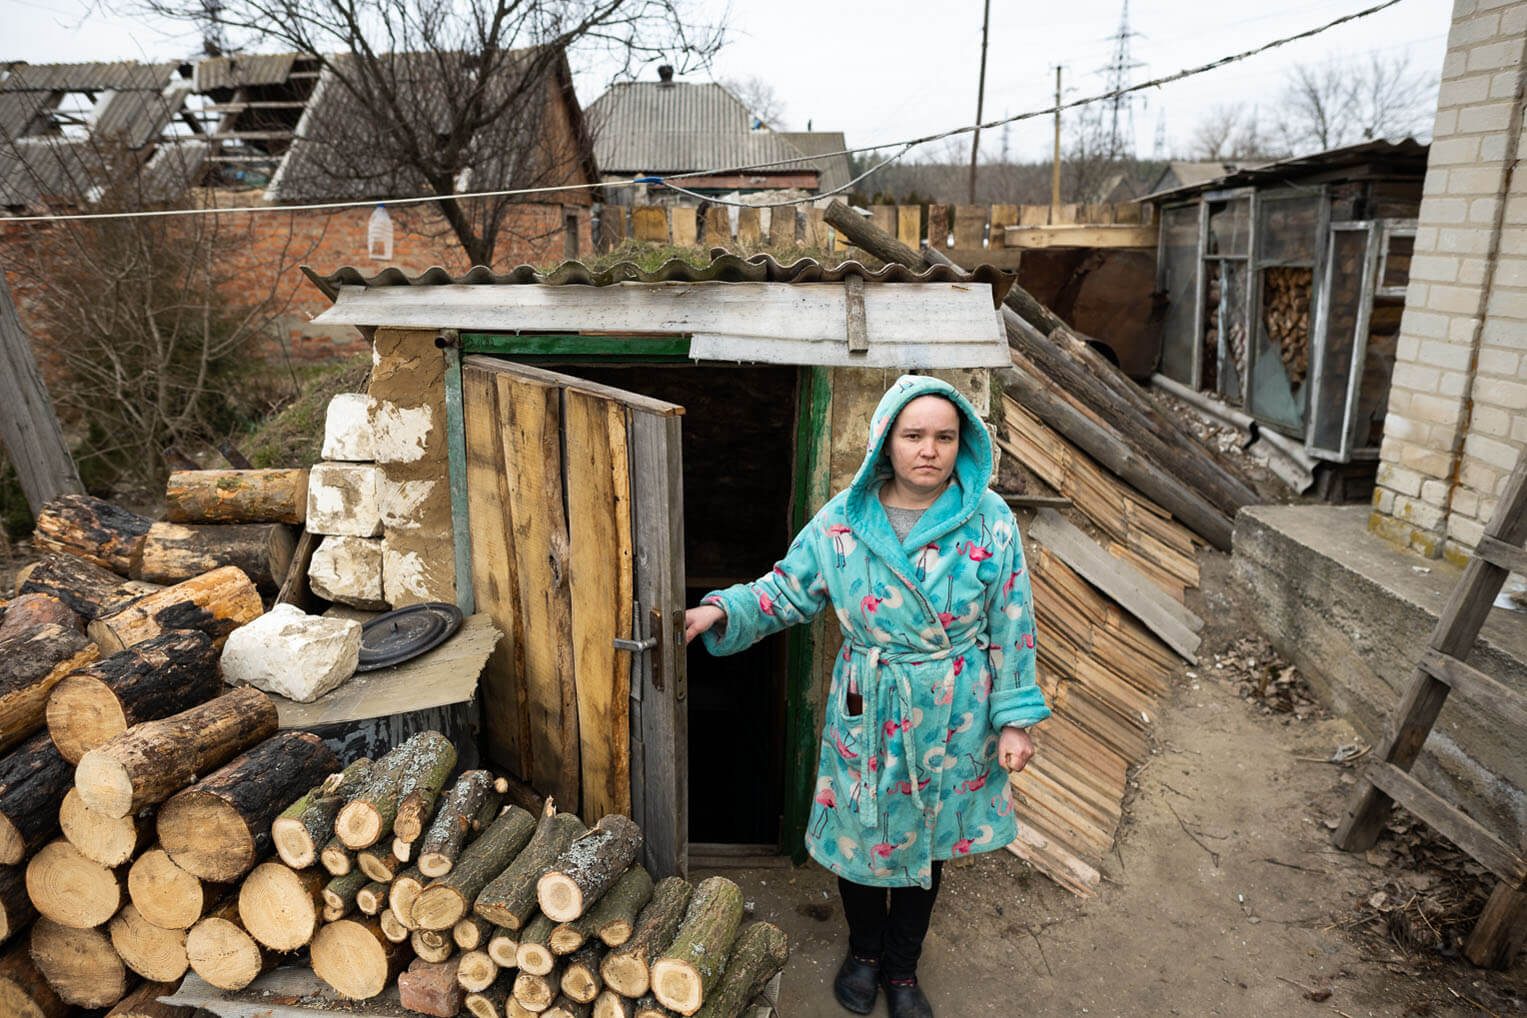 Darya stands outside the cellar where her family takes shelter during shelling.